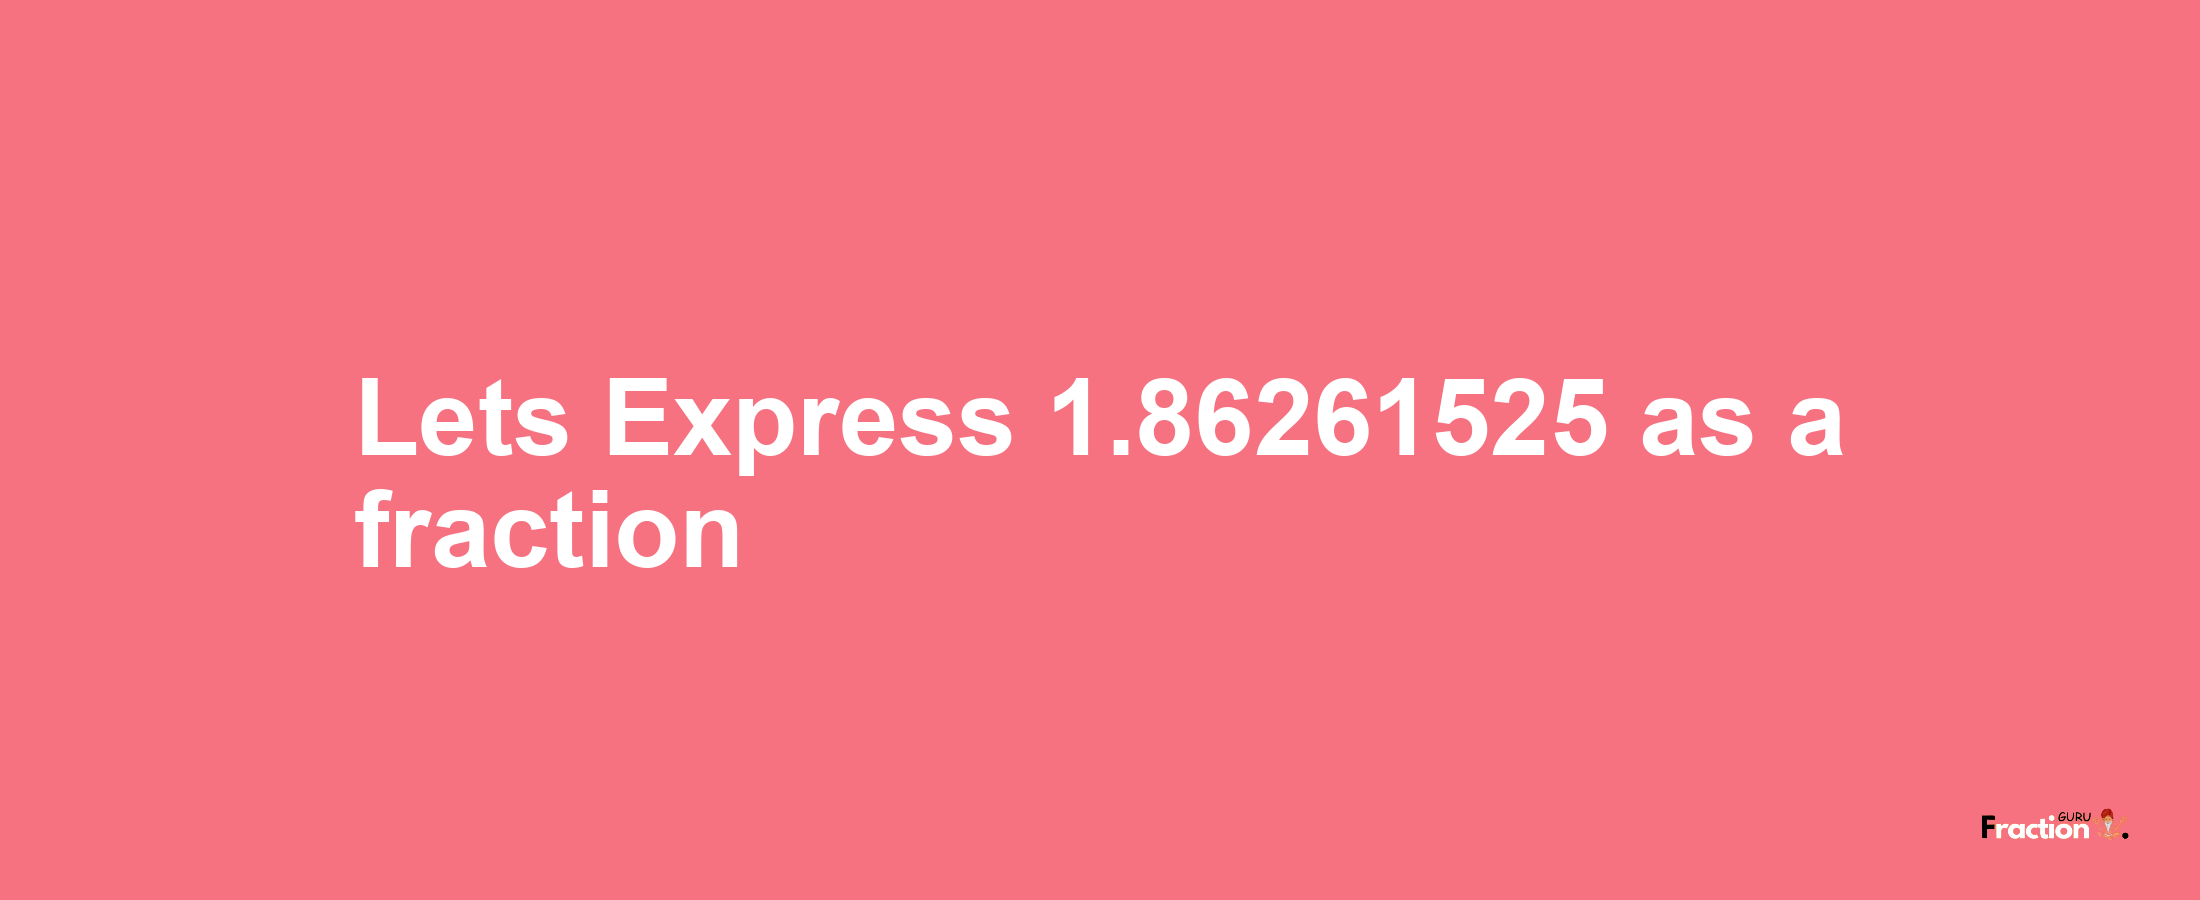 Lets Express 1.86261525 as afraction